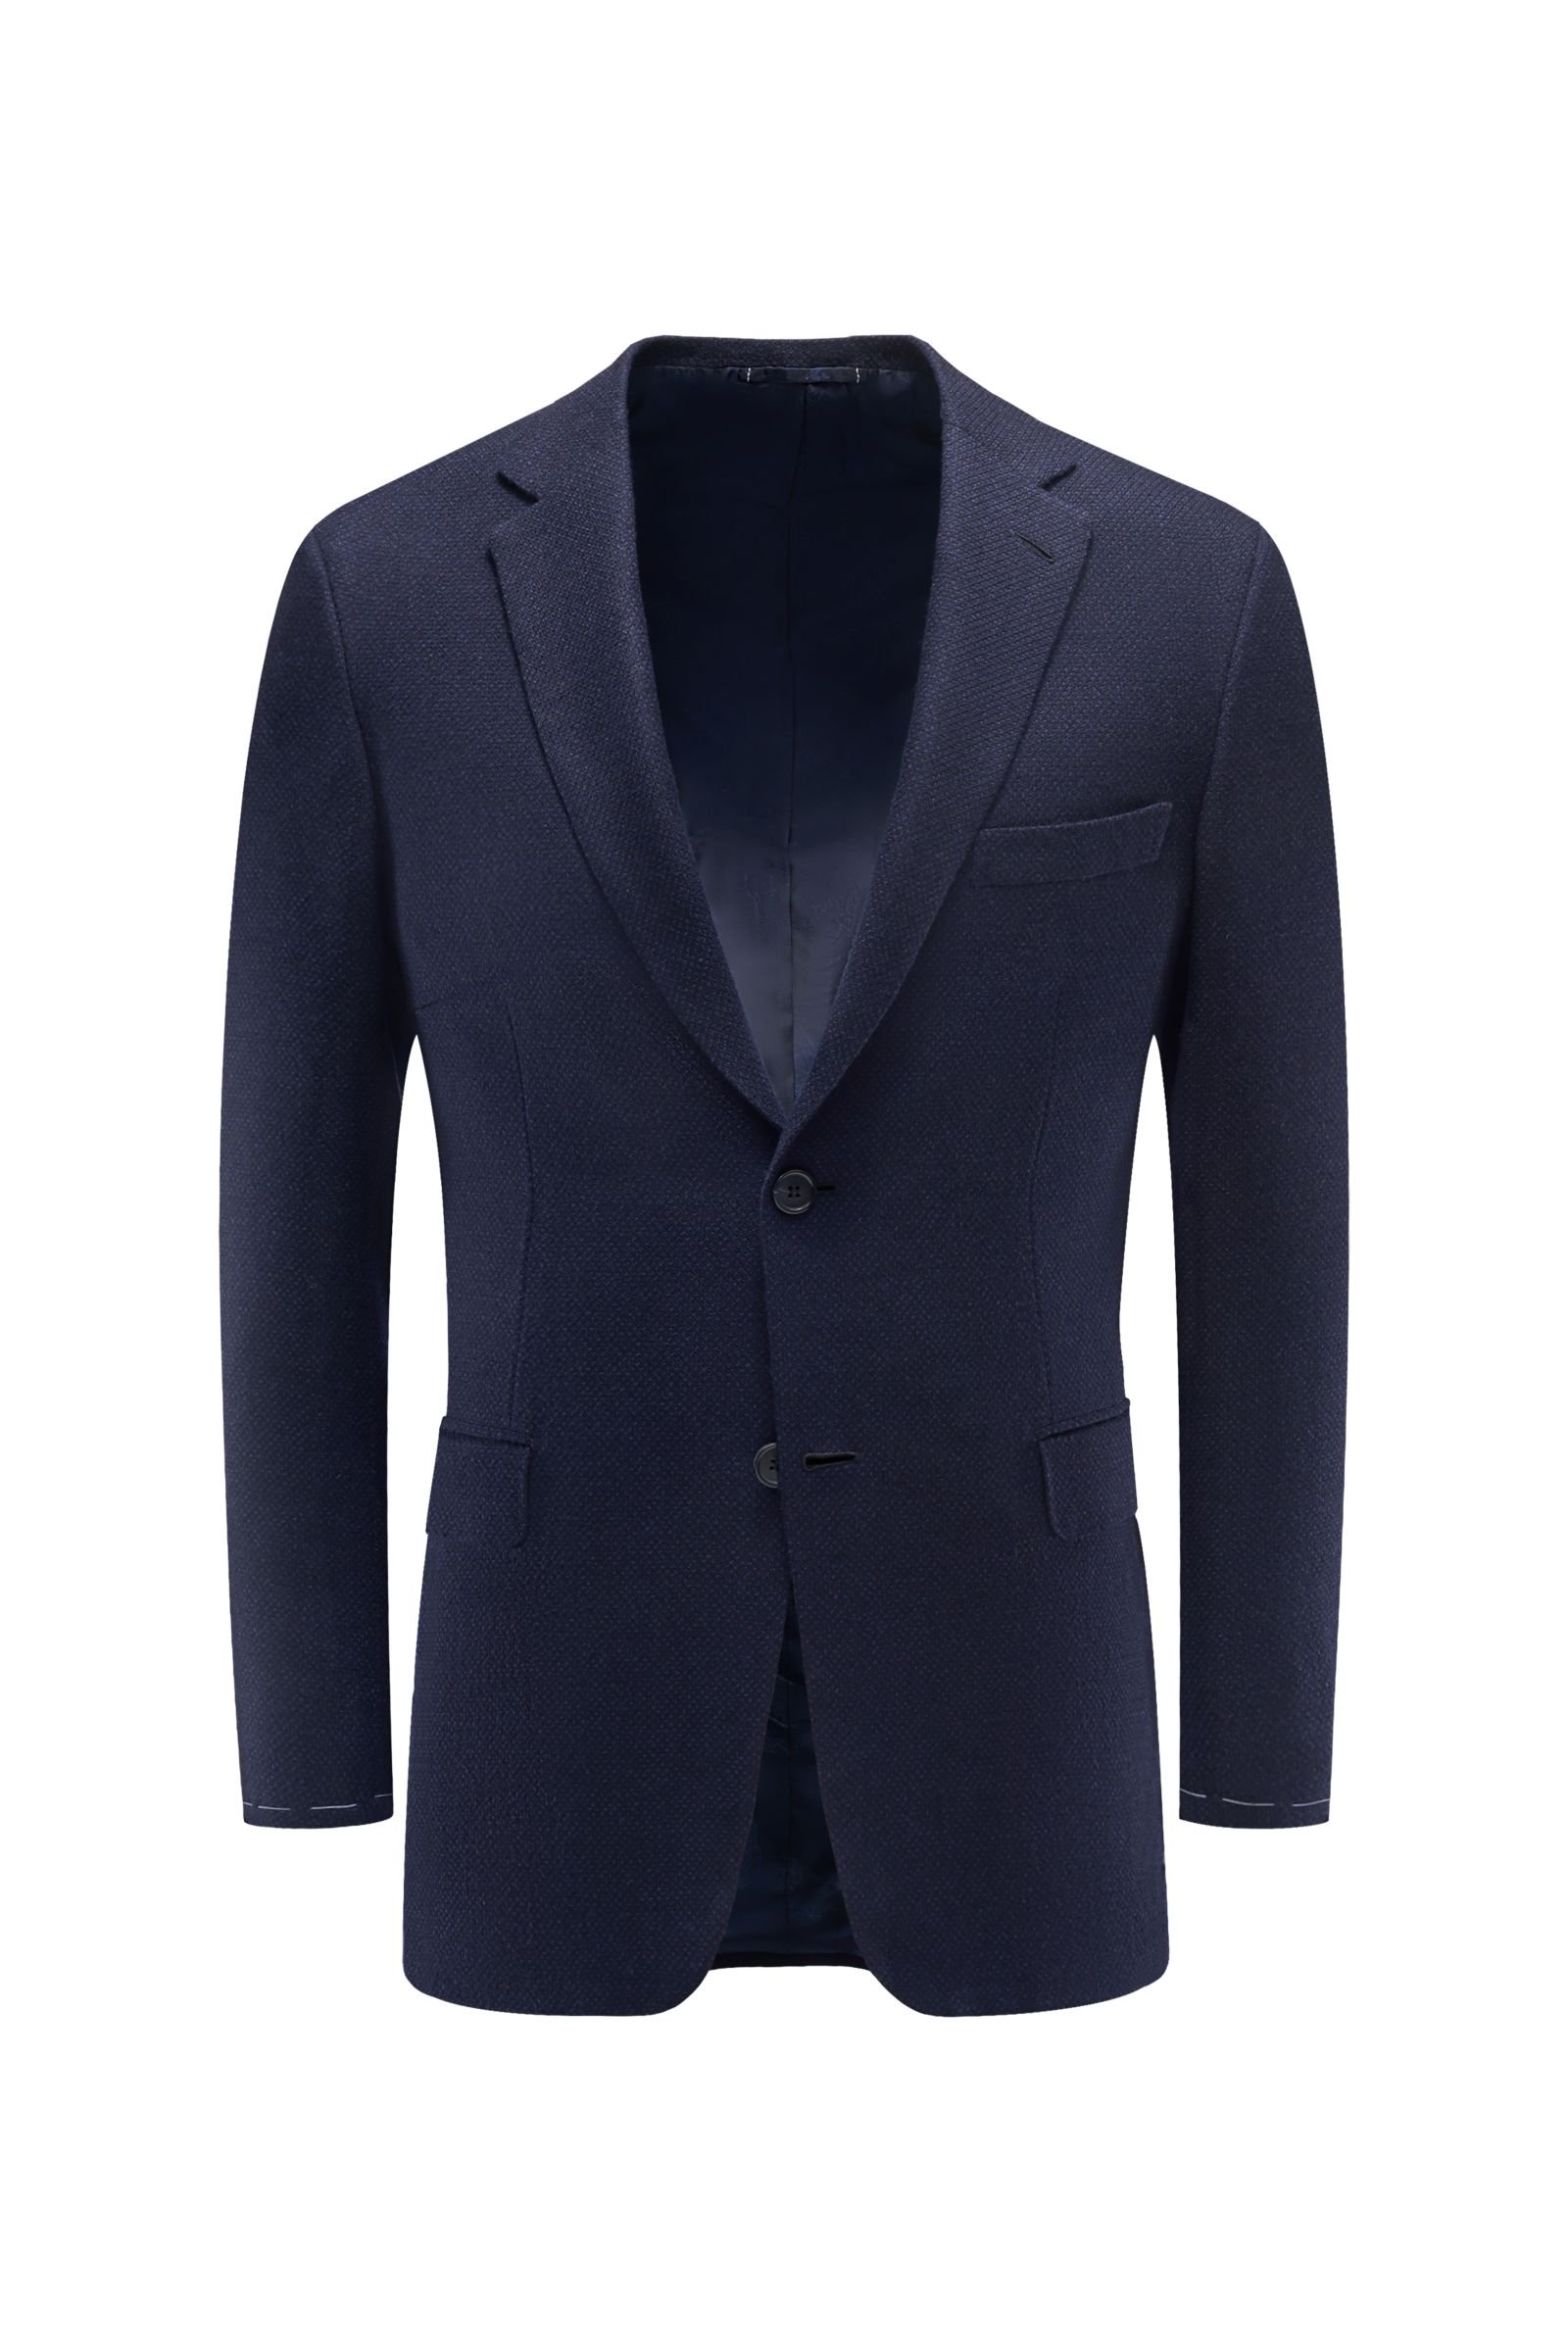 Cashmere smart-casual jacket 'Ravello' navy patterned